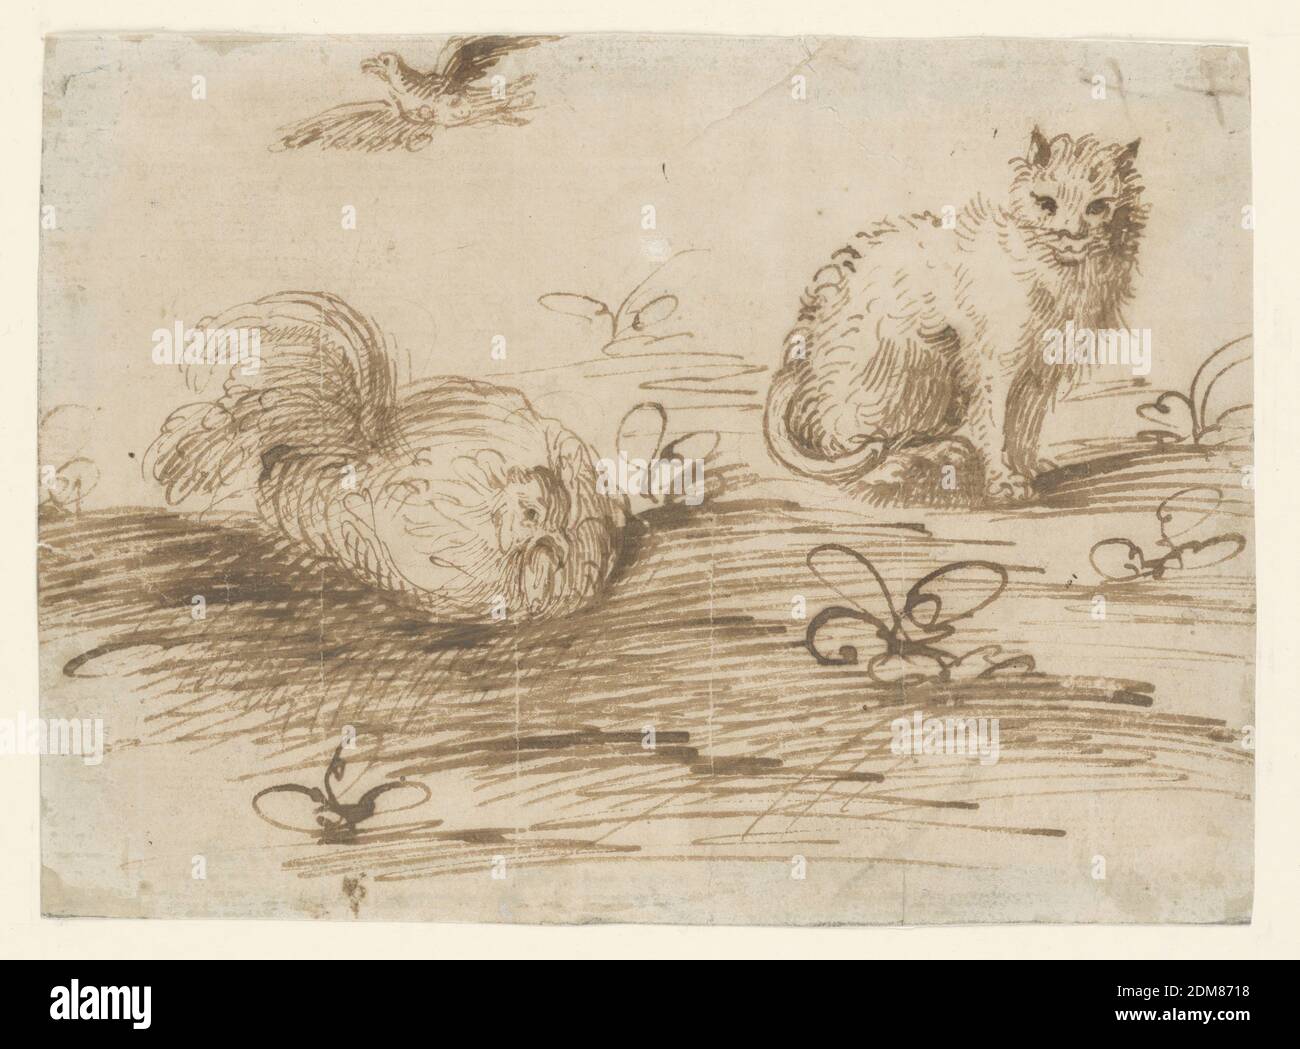 A Cat and a Setting Hen, Pen and brown ink on cream laid paper, A setting hen is on the left, and a bird flies directly above. On the right a placid-looking cat is staring forward. A few scattered plants emerge from the ground., Italy, 1575–1600, nature studies, Drawing Stock Photo